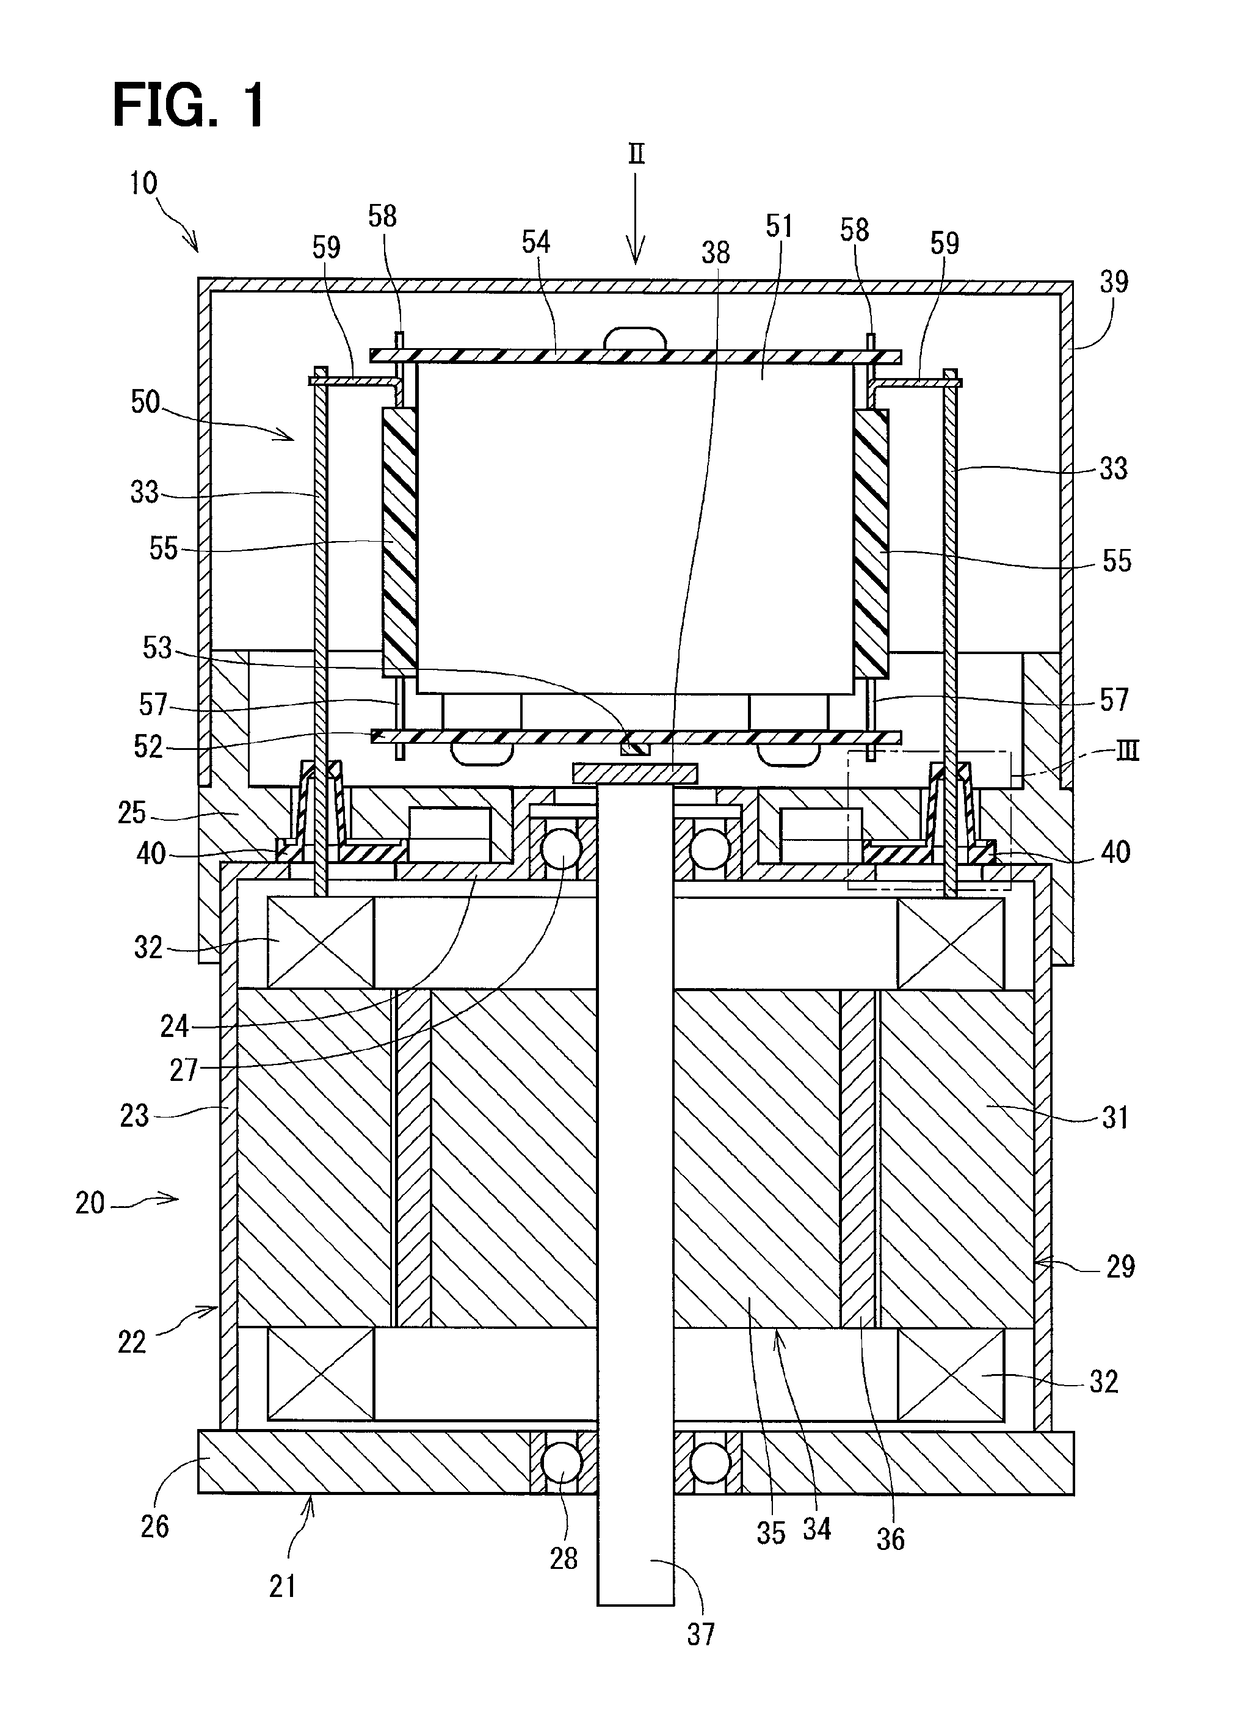 Driver apparatus provided with a motor and a control unit